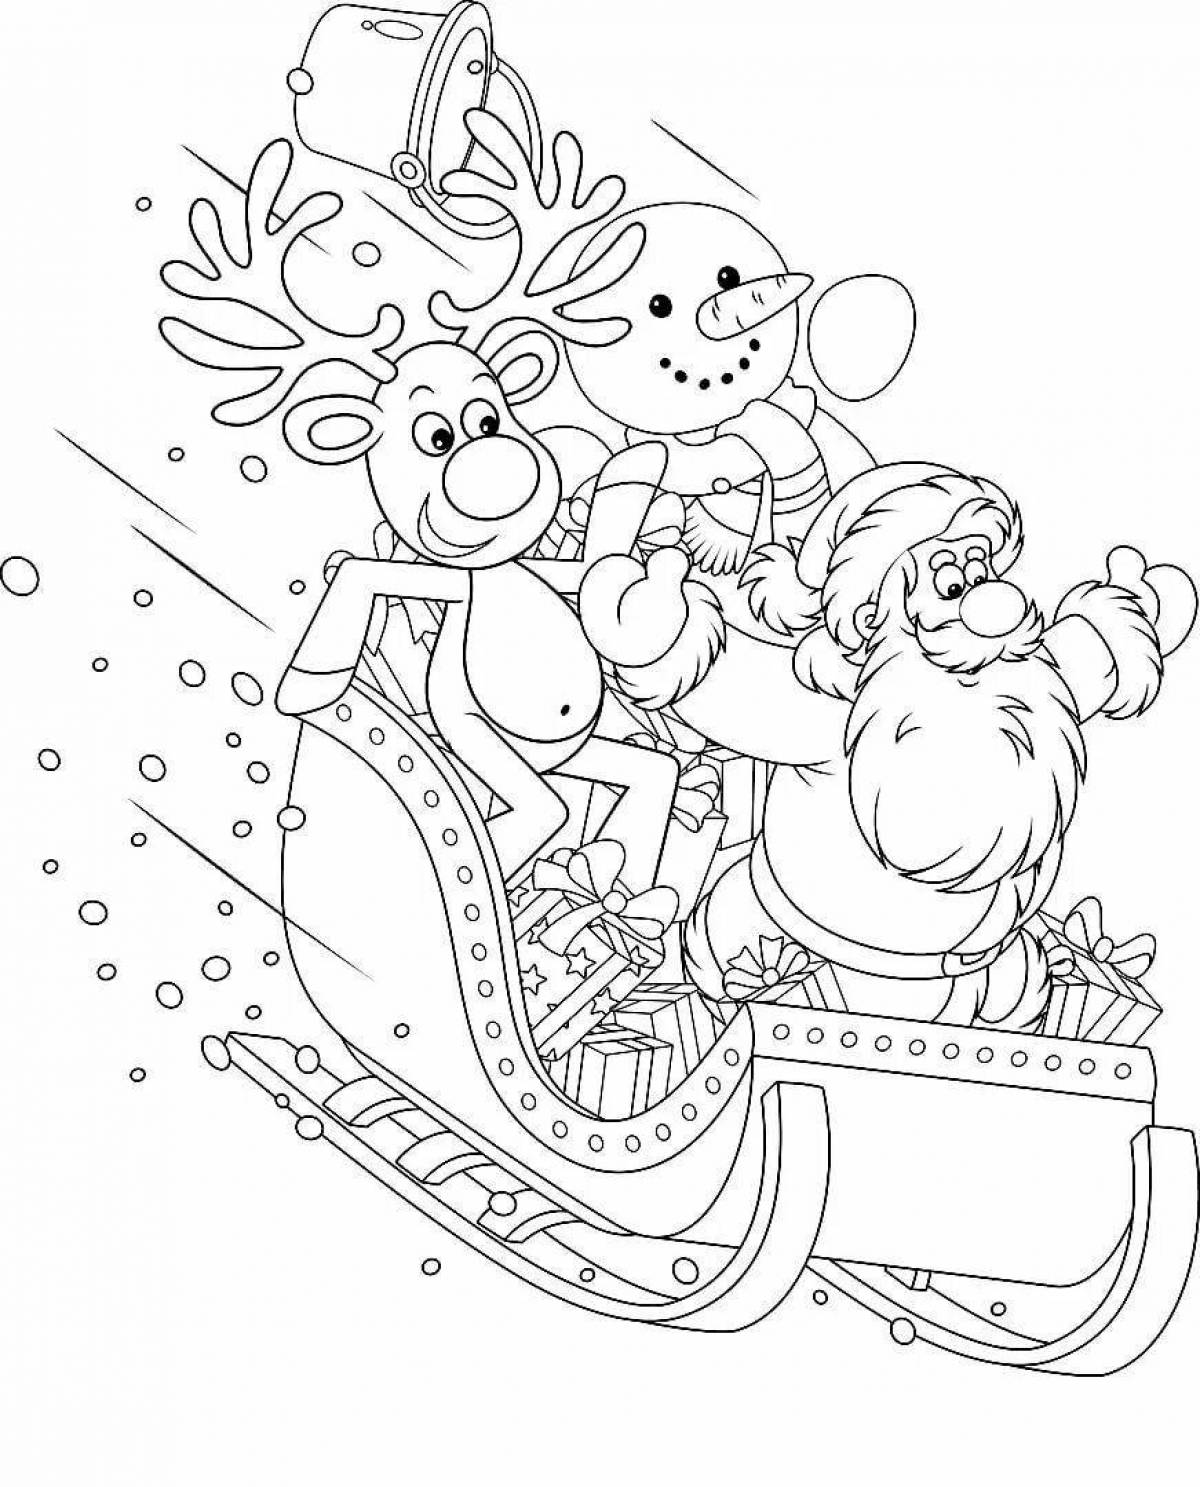 Coloring page of a jubilant snowman on a sleigh